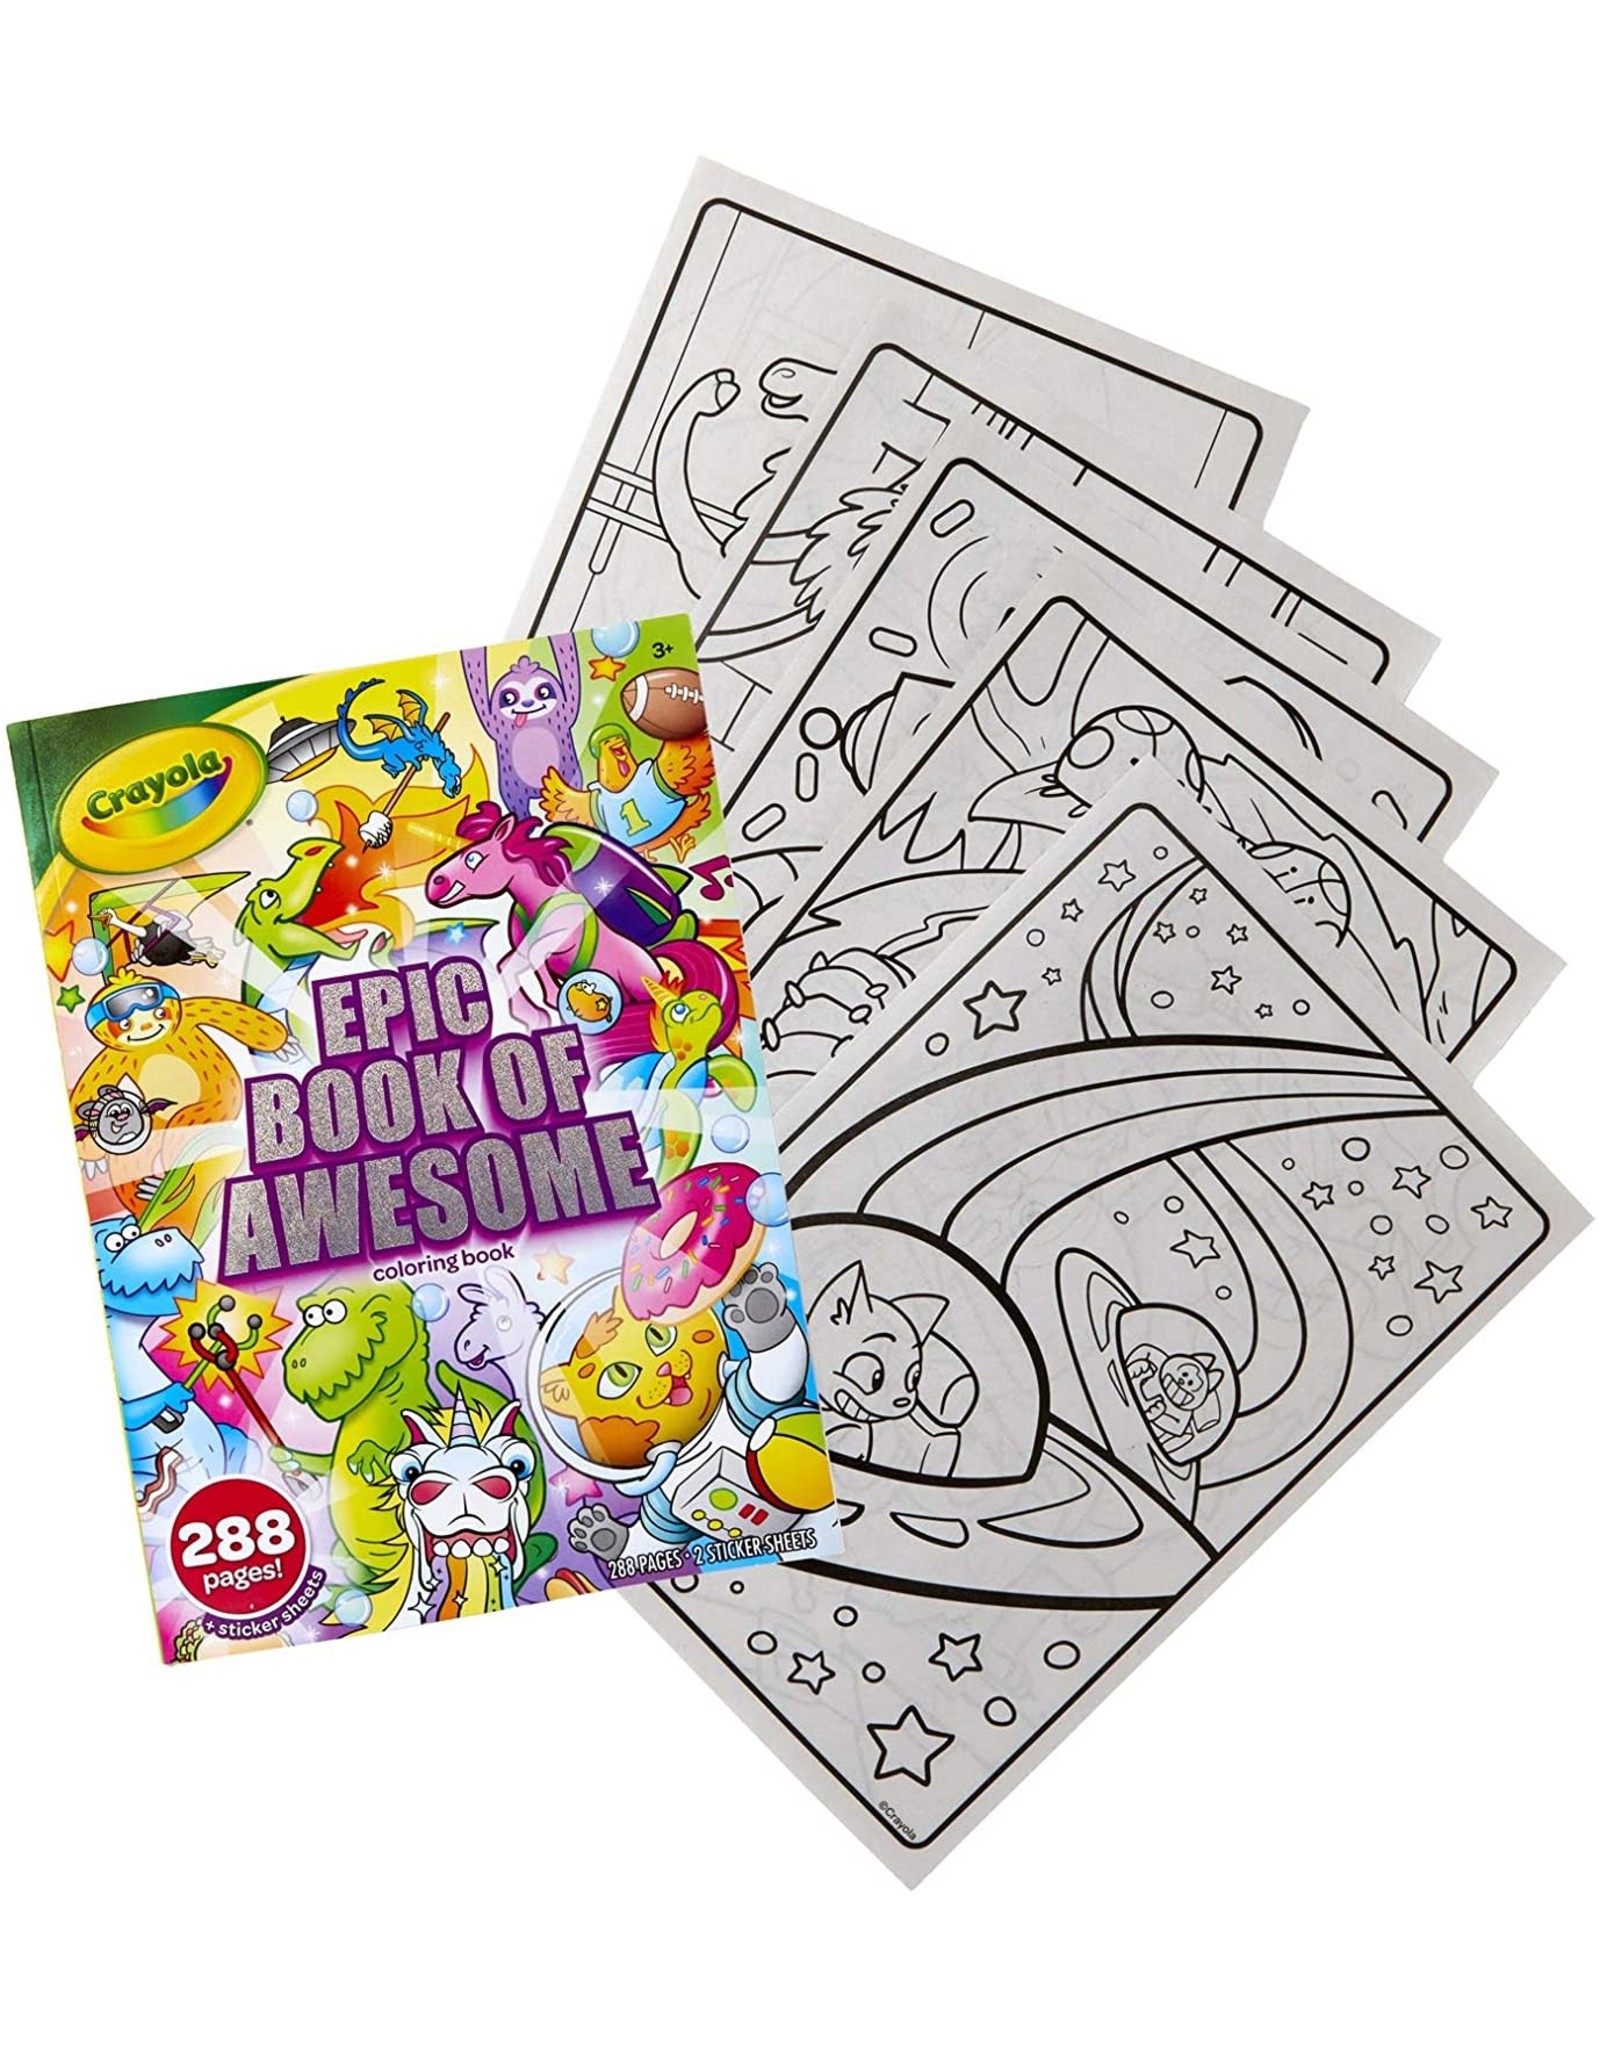 Crayola Epic Book of Awesome - 288 pg